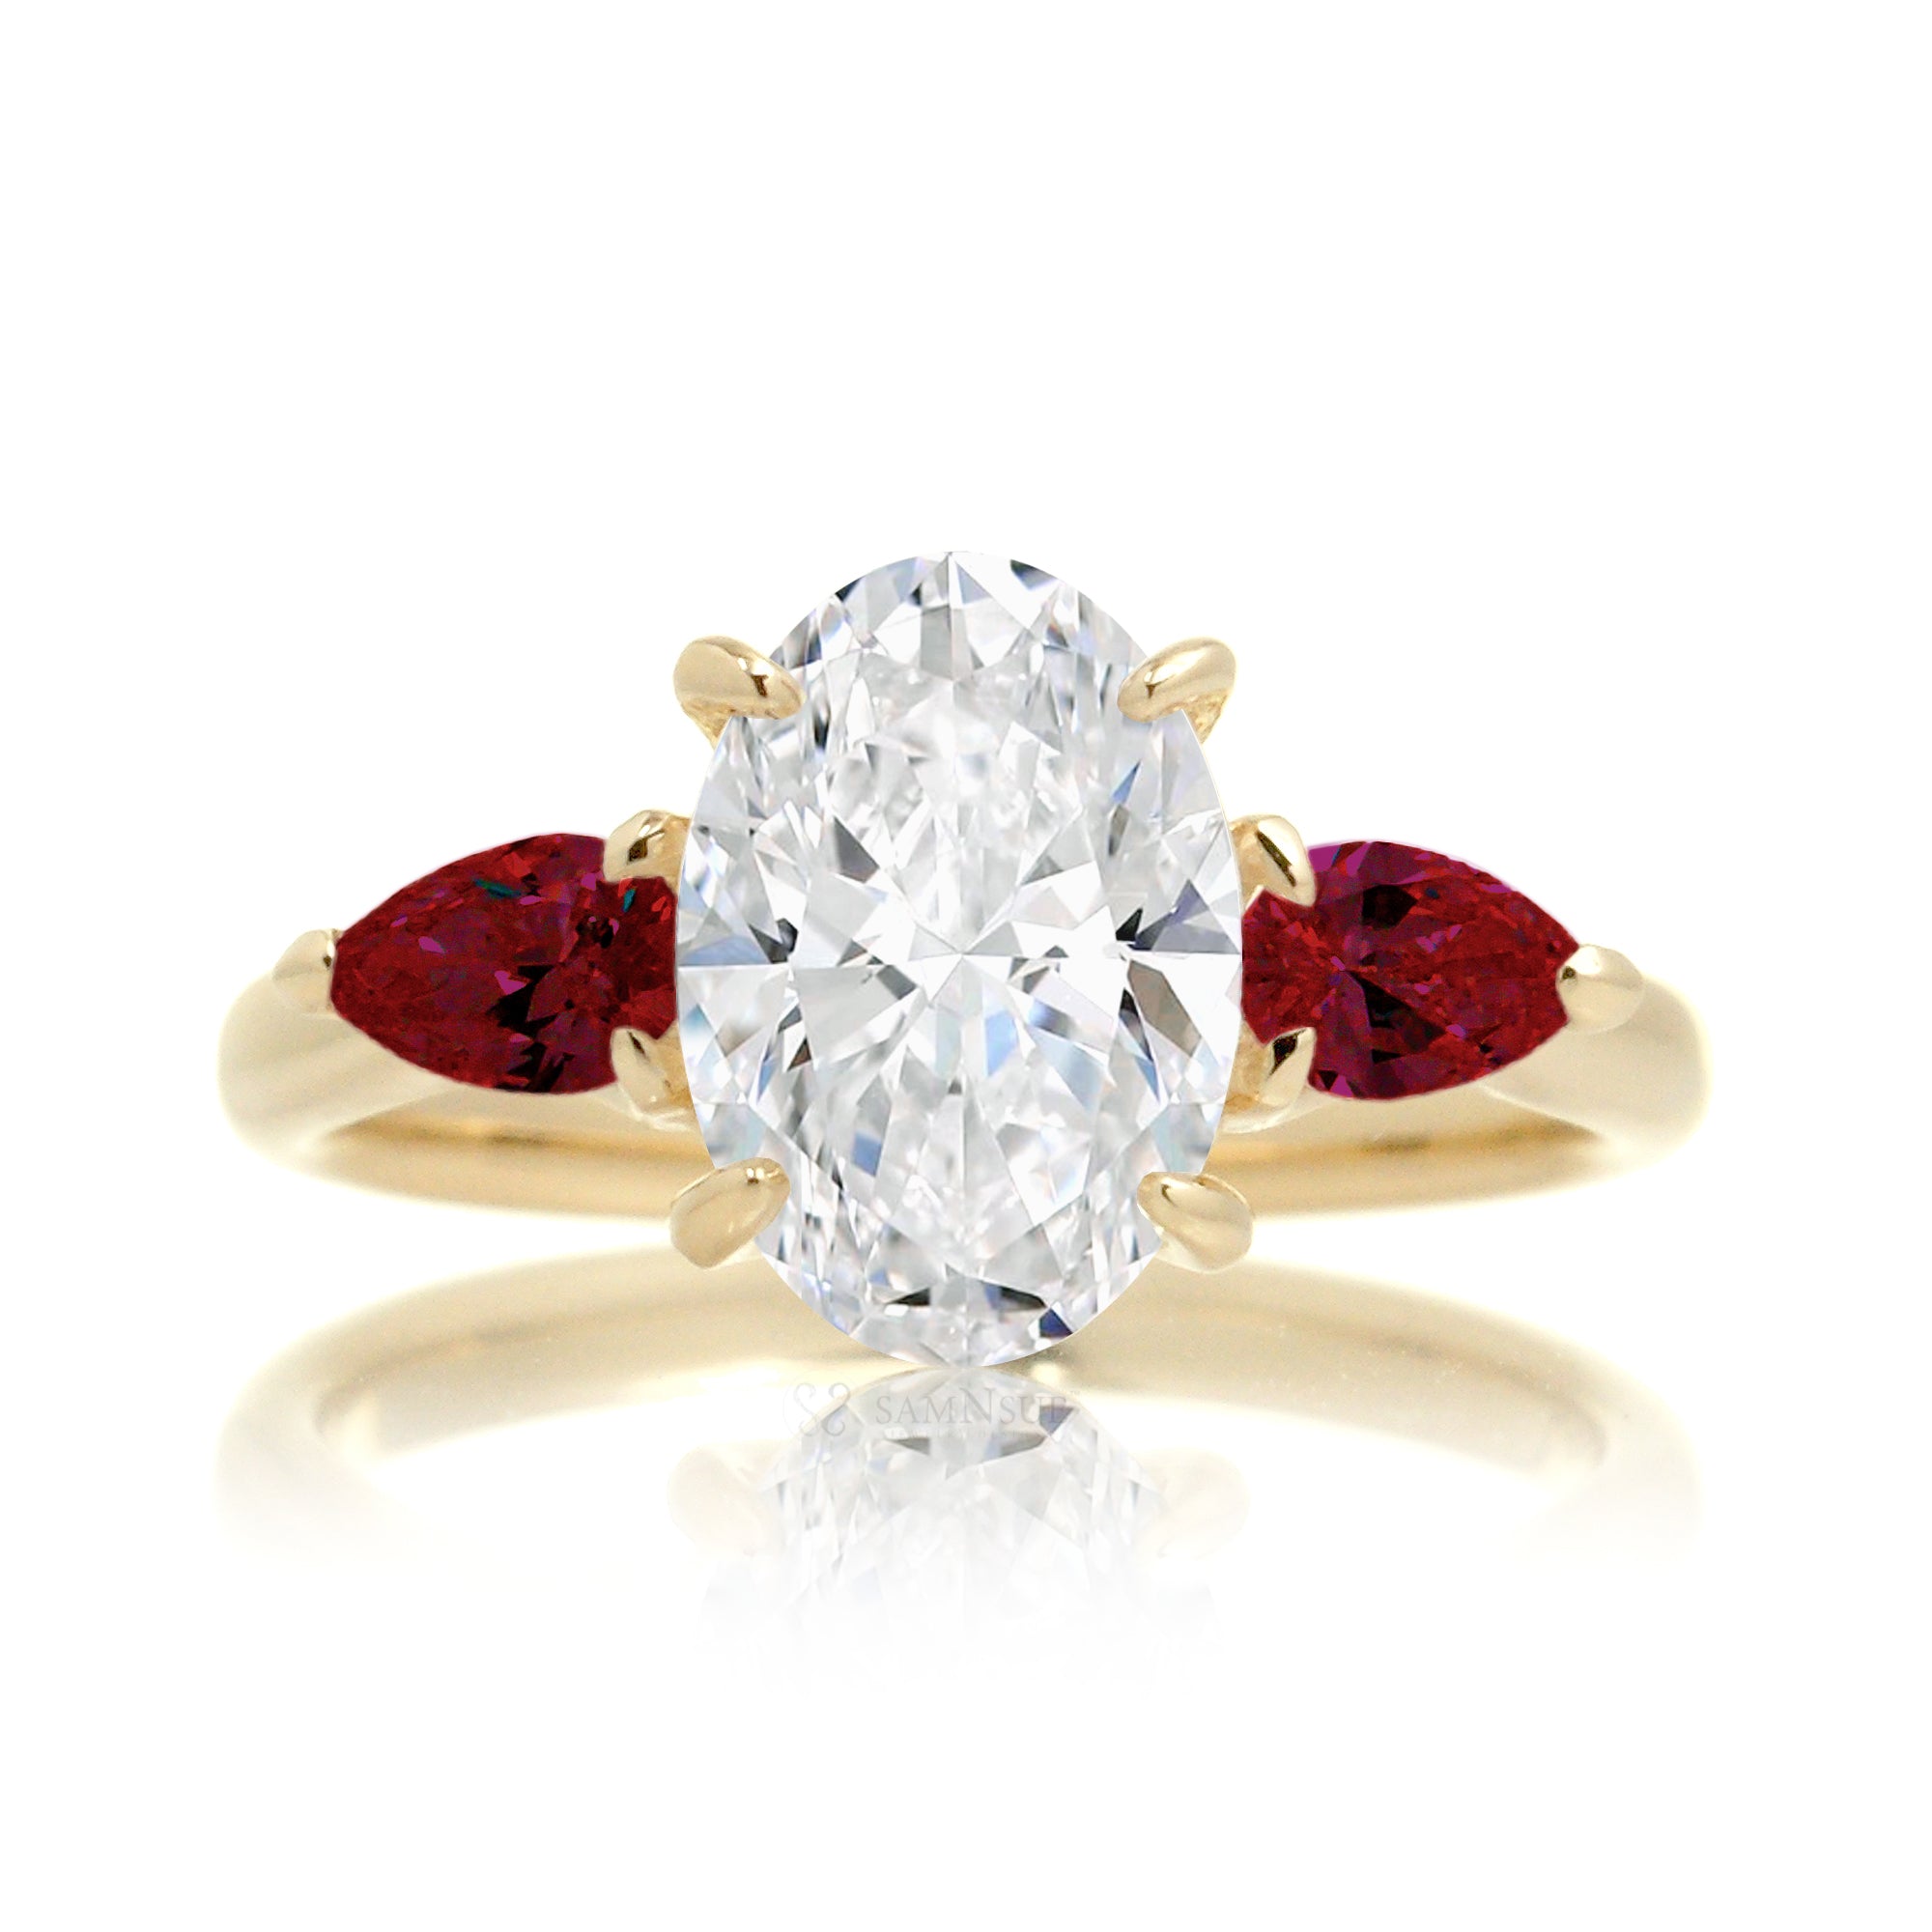 Three-stone pear ruby and oval cut diamond engagement ring yellow gold